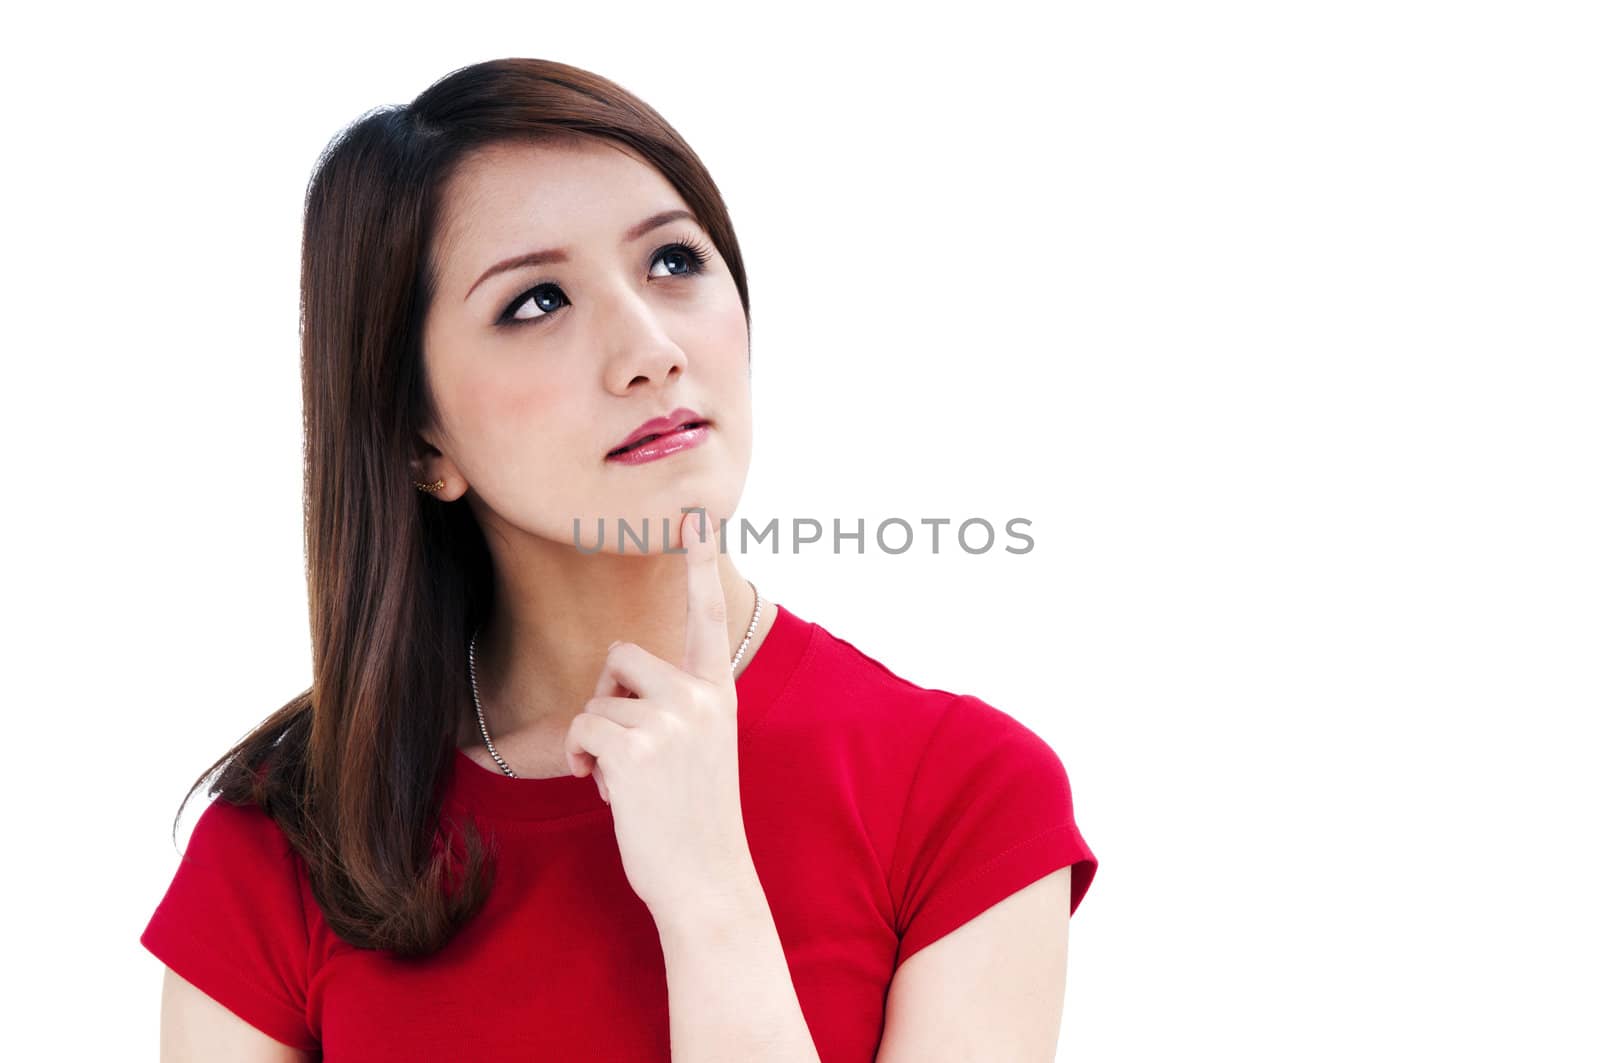 Closeup of an attractive young woman thinking, isolated on white background.